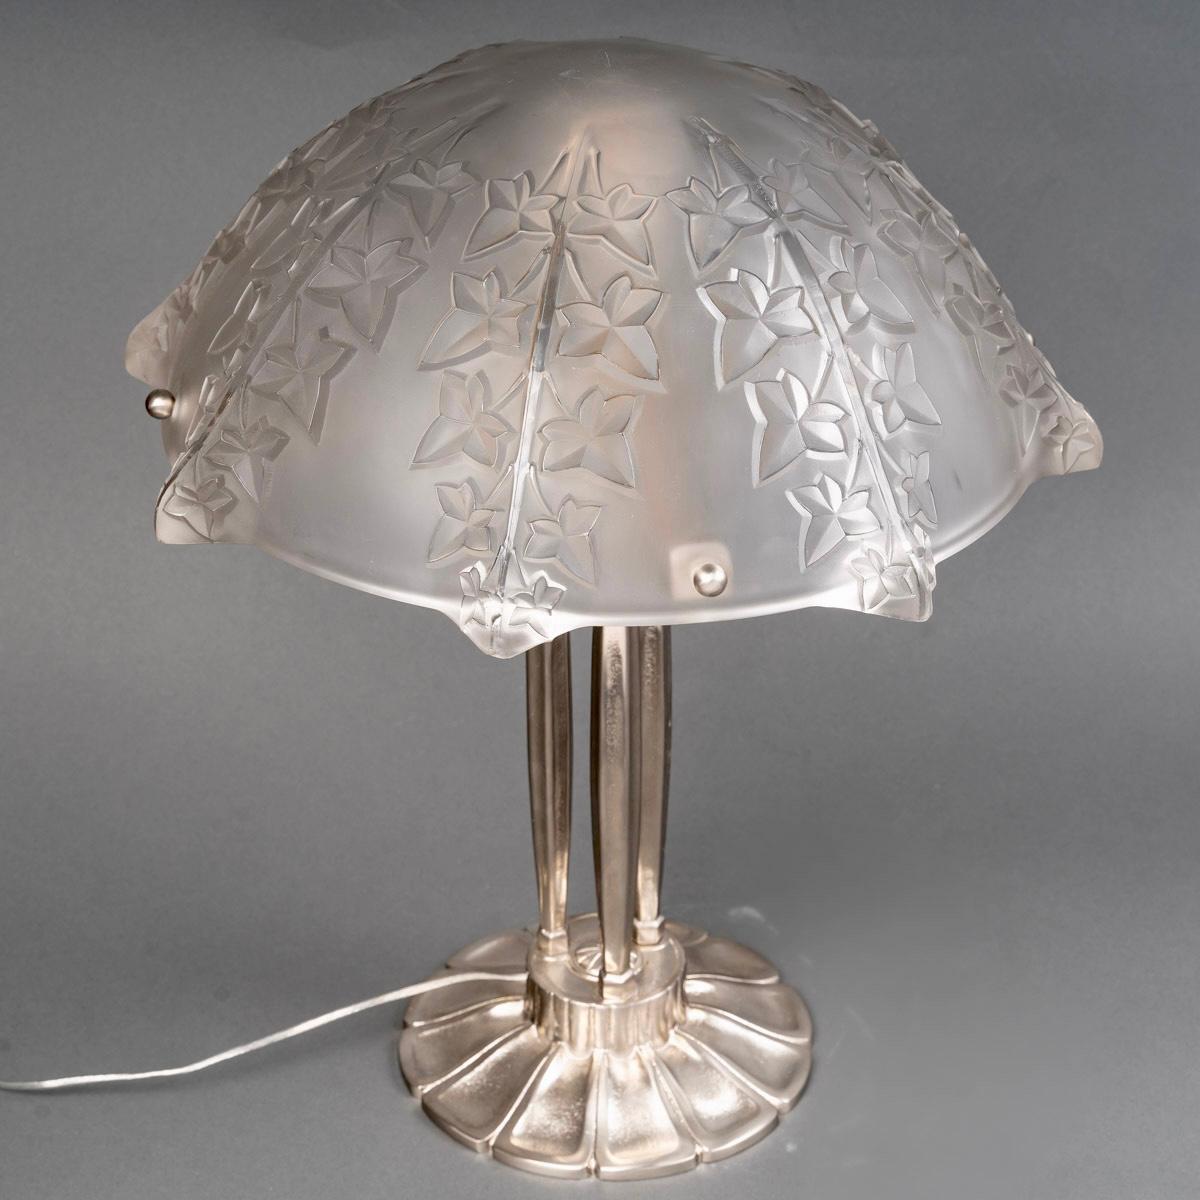 French 1927 René Lalique - Pair Of Lamps Lierre Ivy Glass & Nickeled Bronze  For Sale